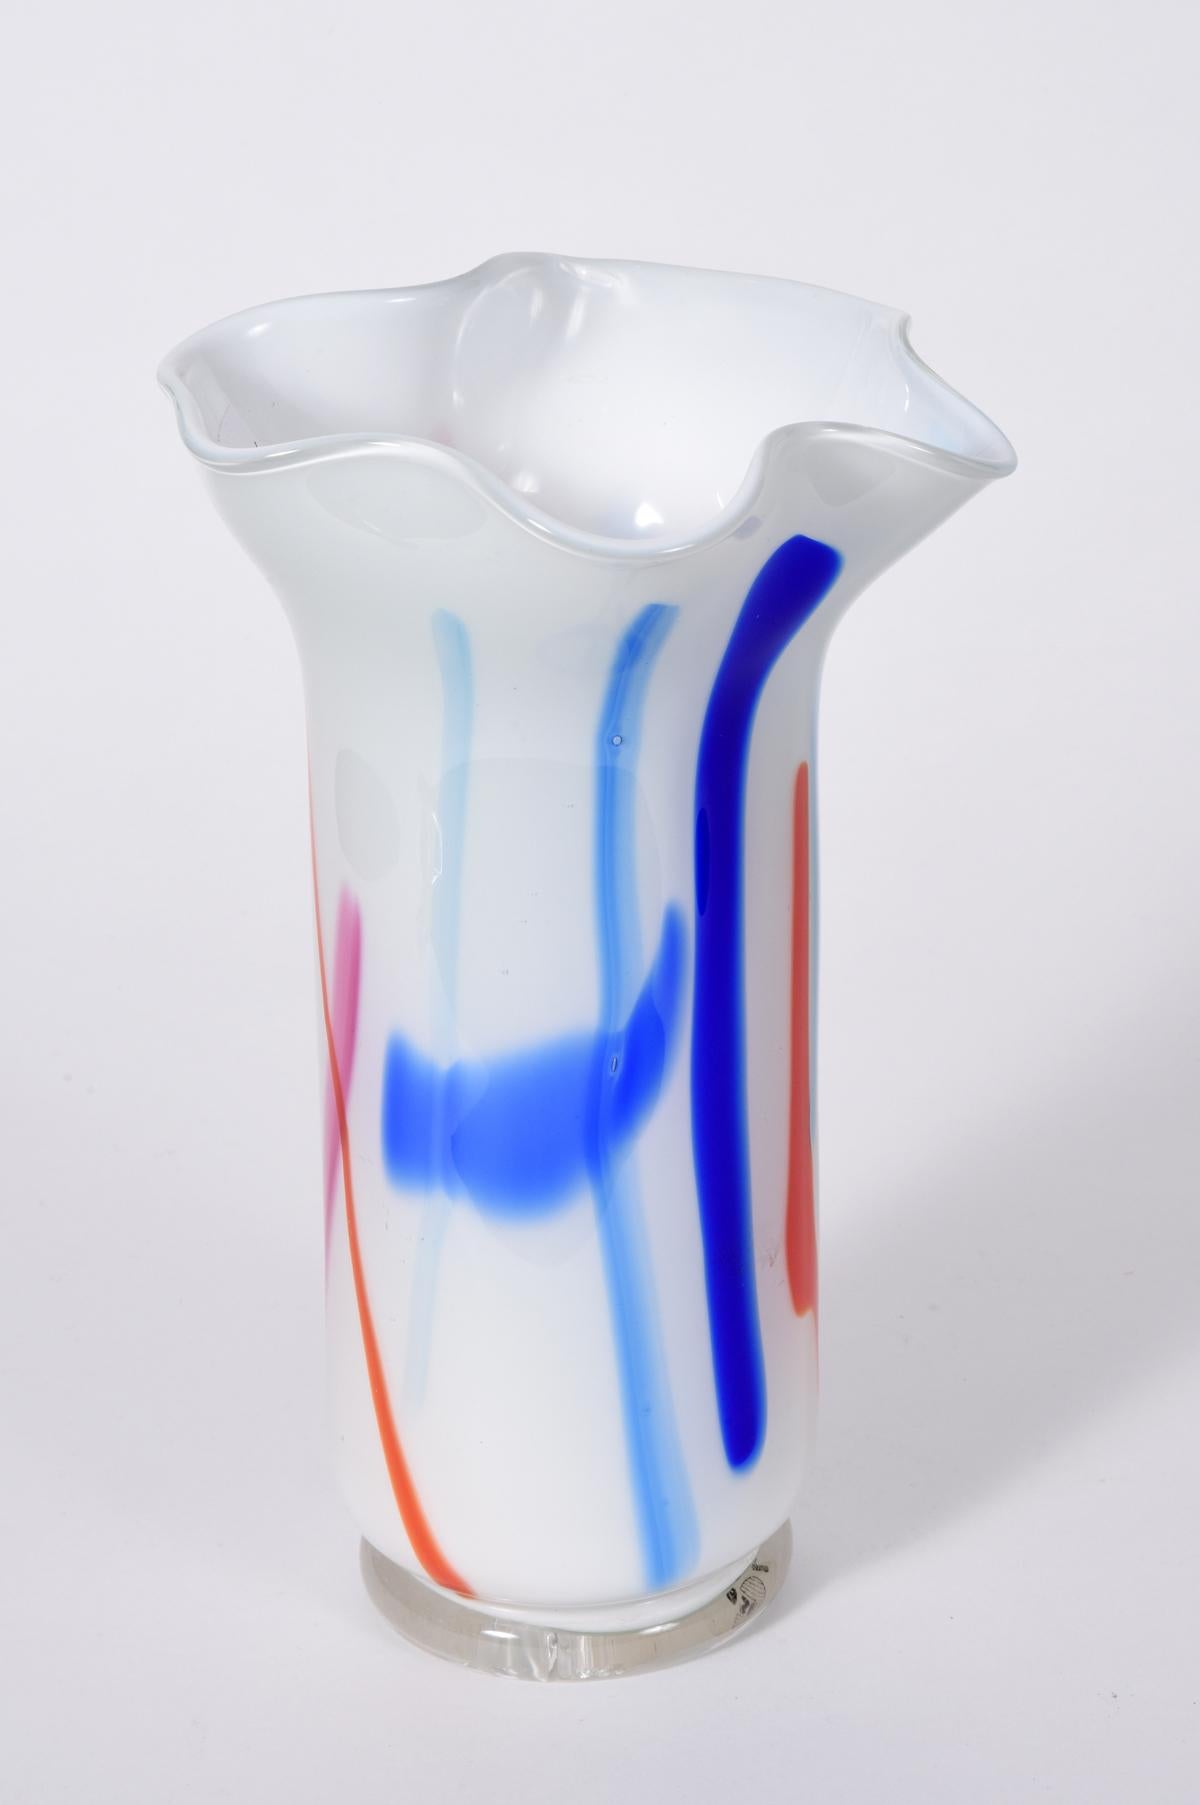 Mid-Century Modern, Art Deco style Murano glass decorative vase. The vase is in excellent vintage condition, maker's mark undersigned. The vase measure about 10 inches high x 6 inches diameter.